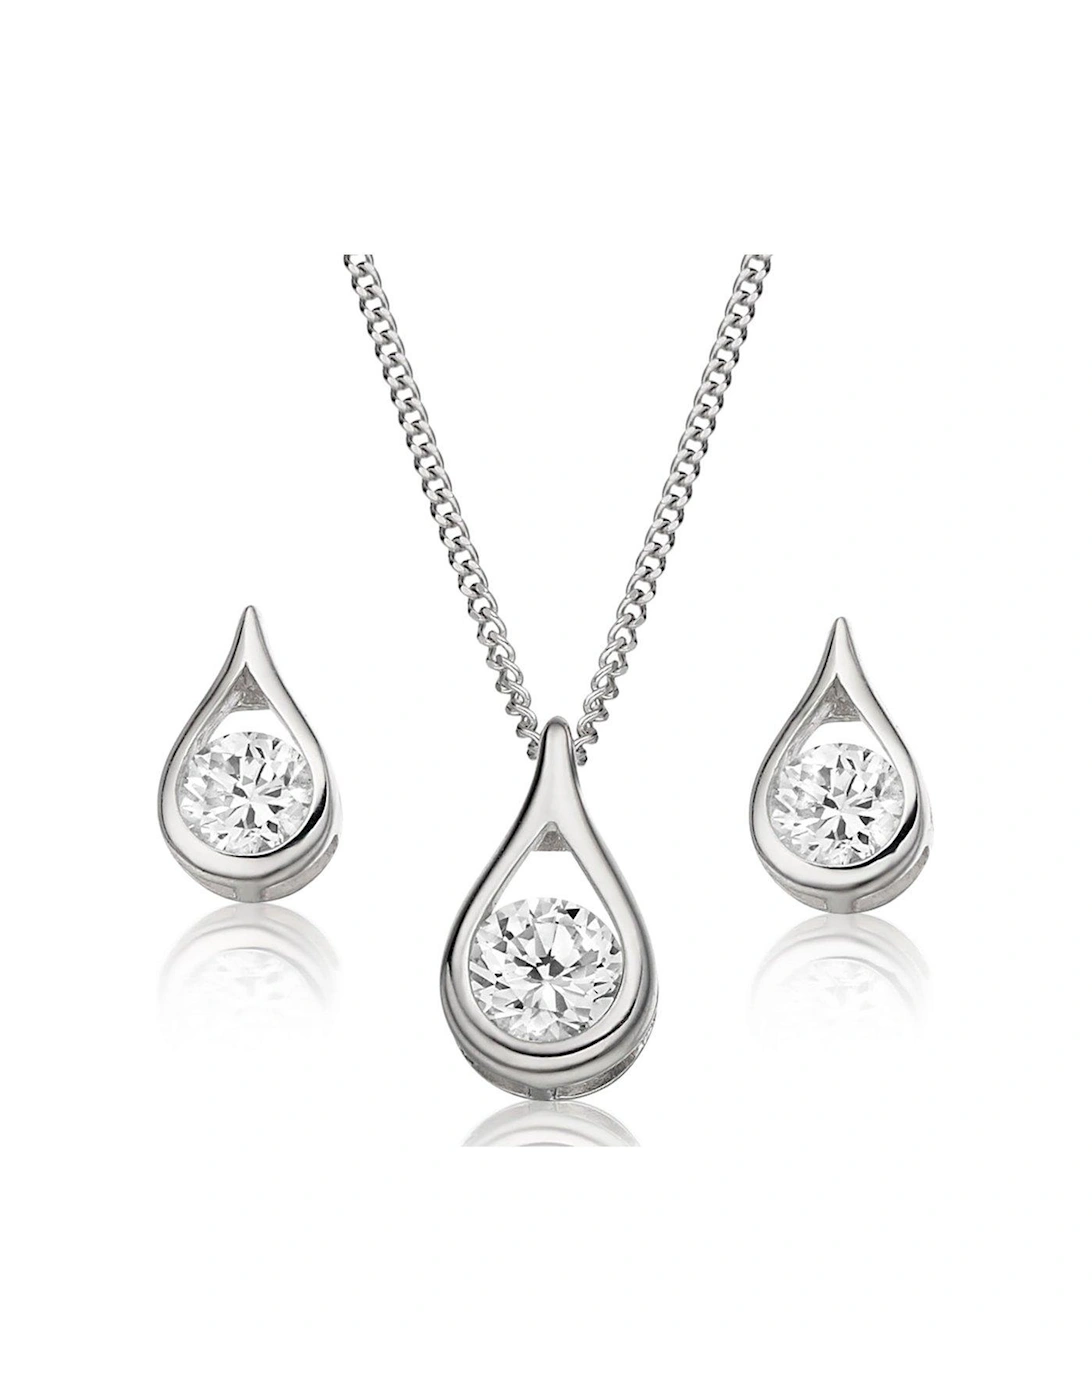 9ct White Gold CZ Pear Shaped Pendant and Earrings Set, 2 of 1